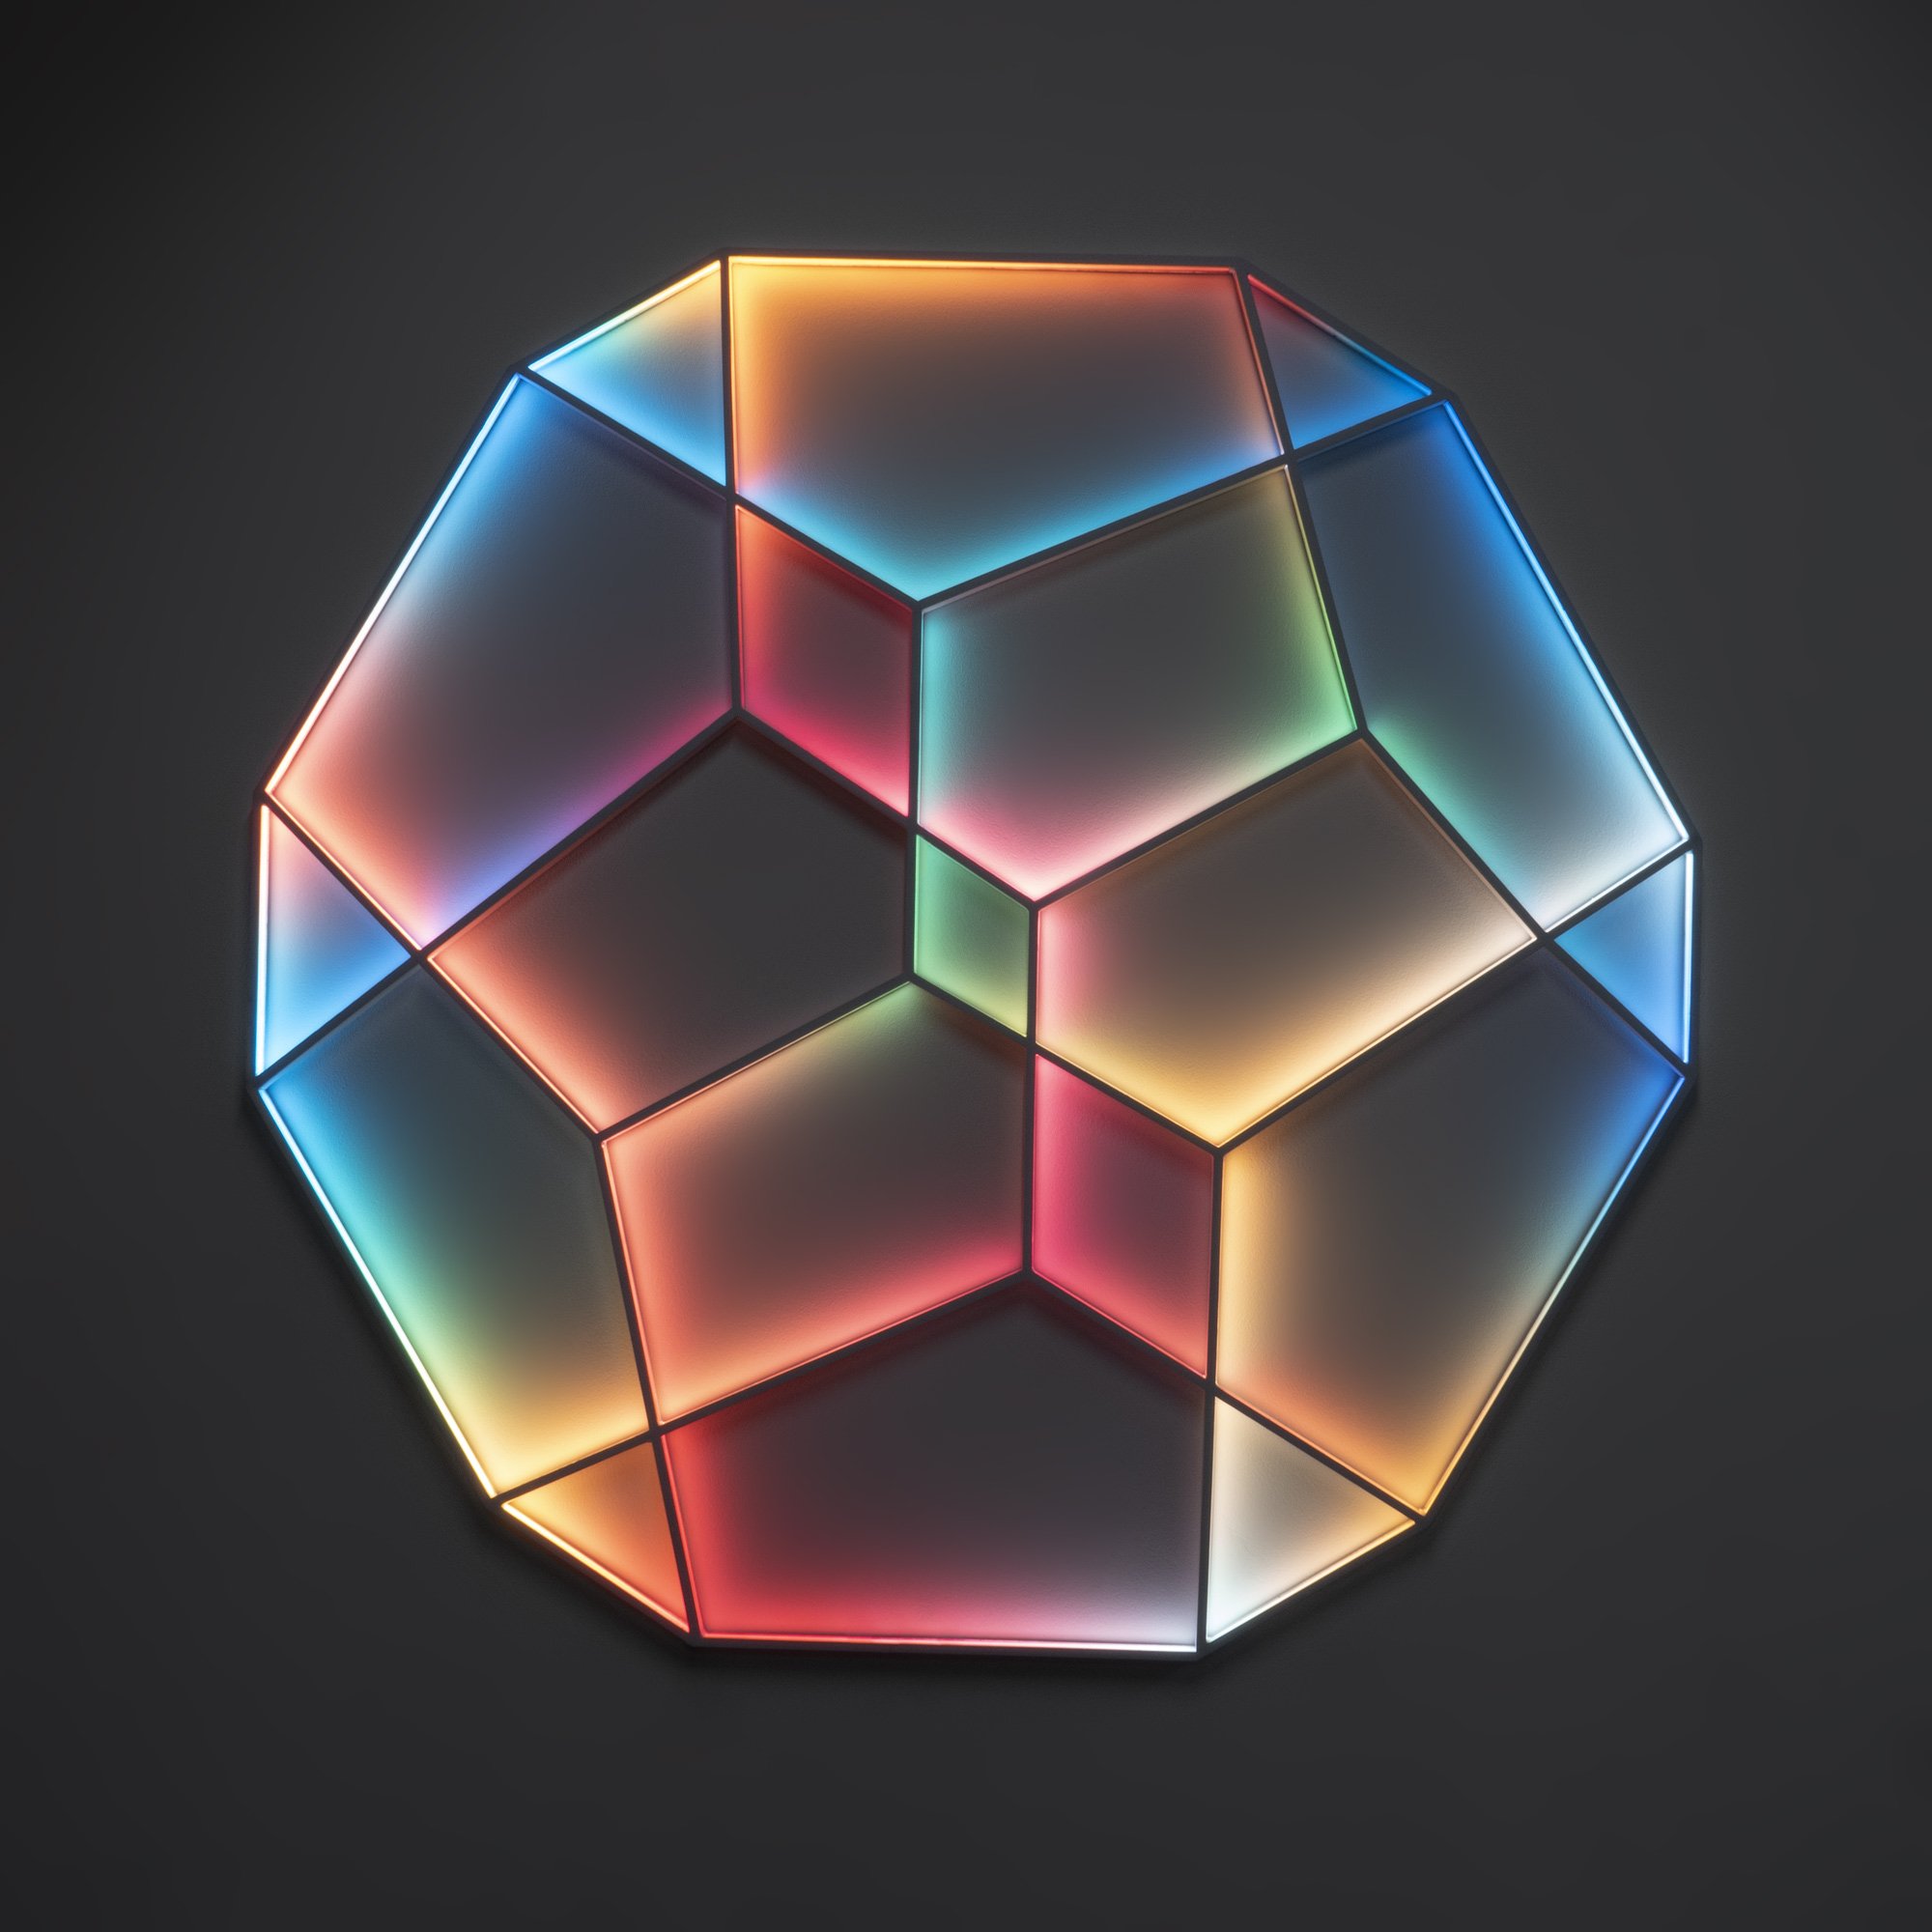   James Clar ,  Refraction Sphere , 2023. LED lights, filters, laser-cut metal, 41 x 39 3/4 inches. 